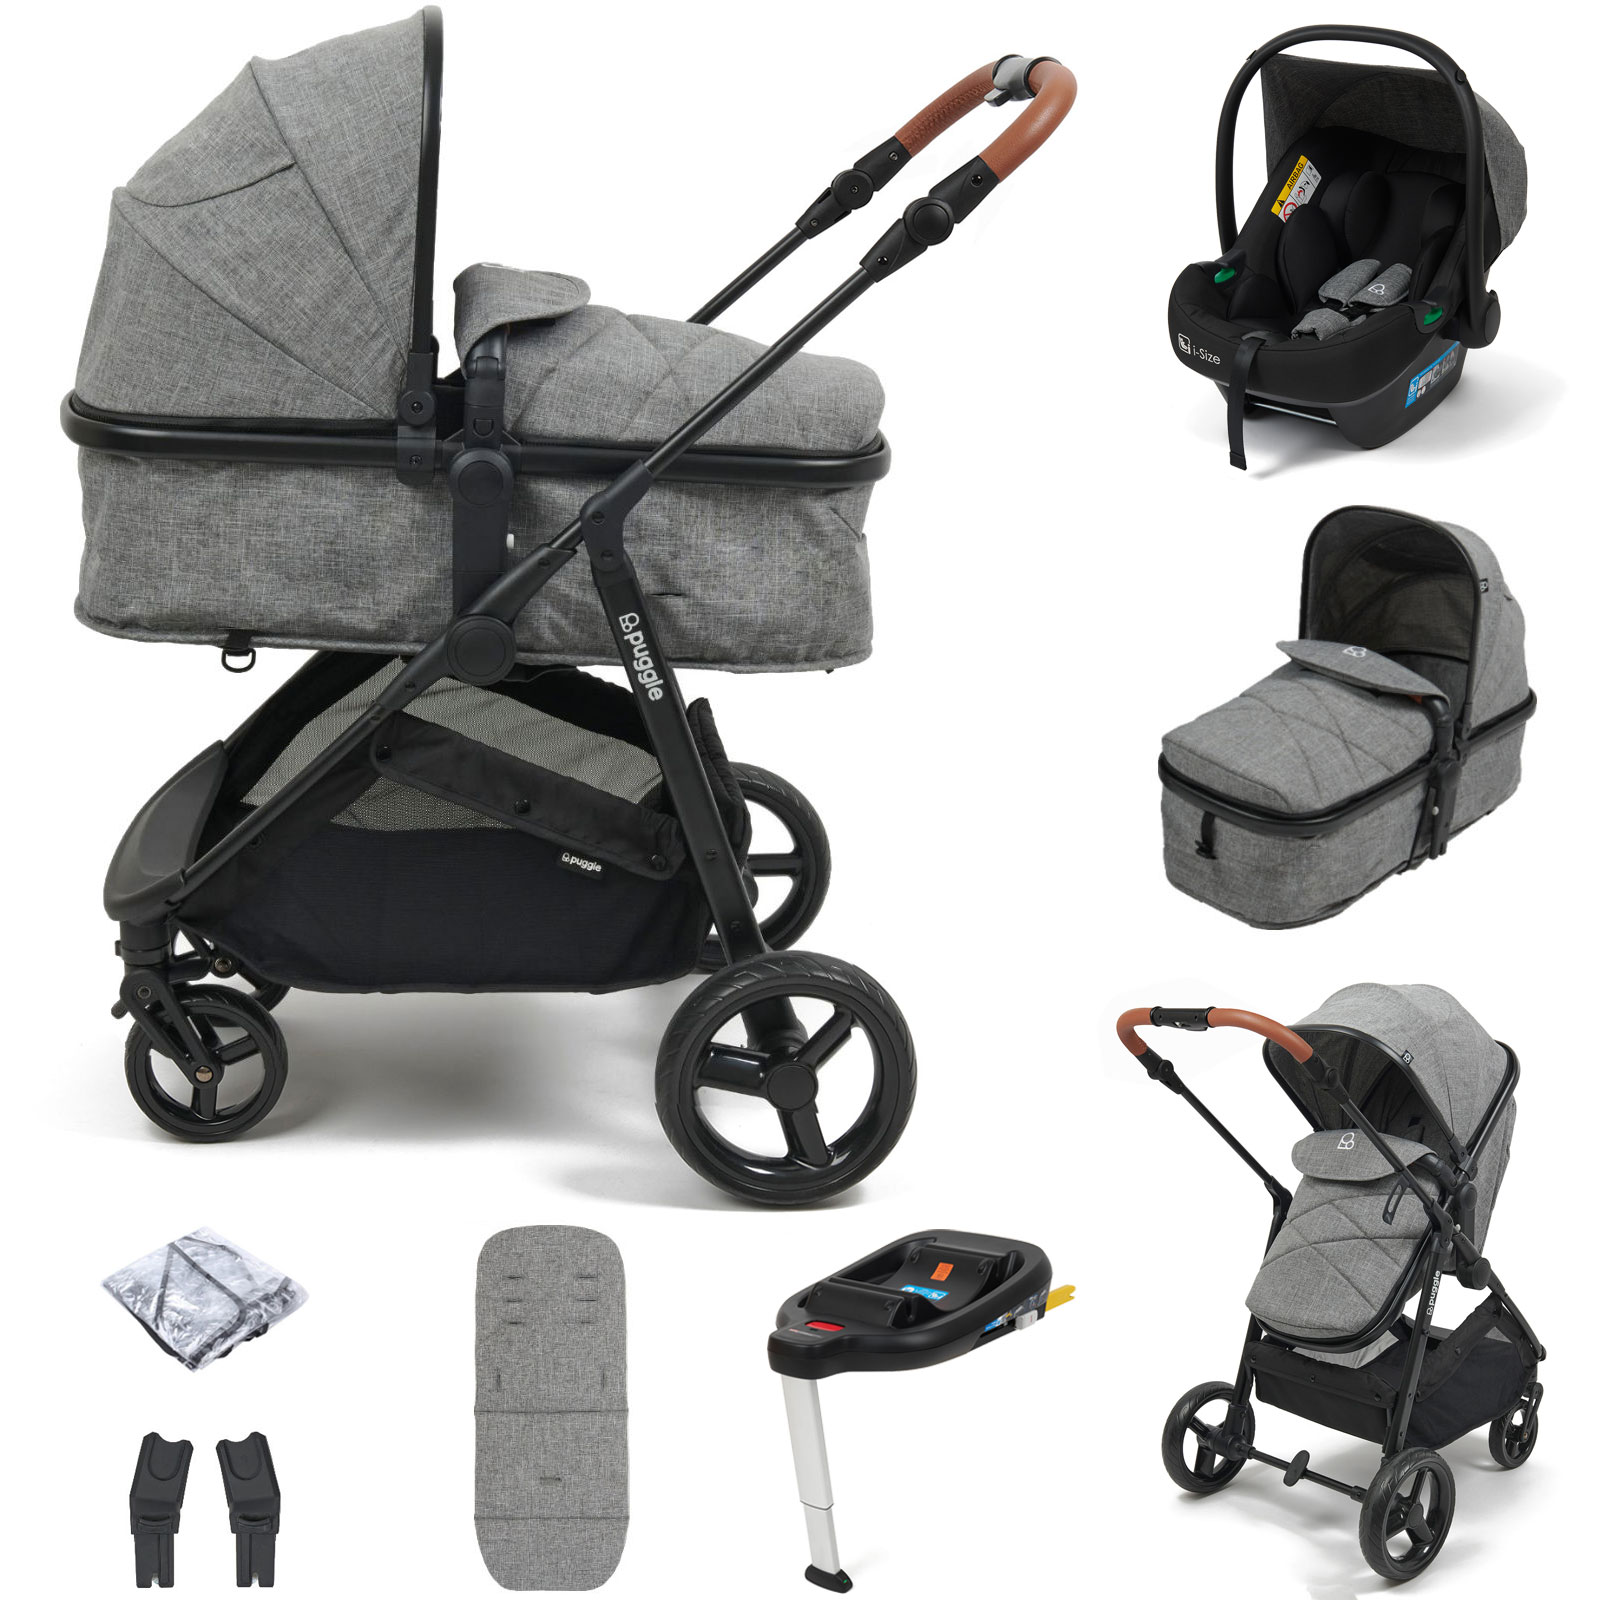 Puggle Monaco XT 2in1 With Adjustable Handles i-Size Travel System with ISOFIX Base - Graphite Grey